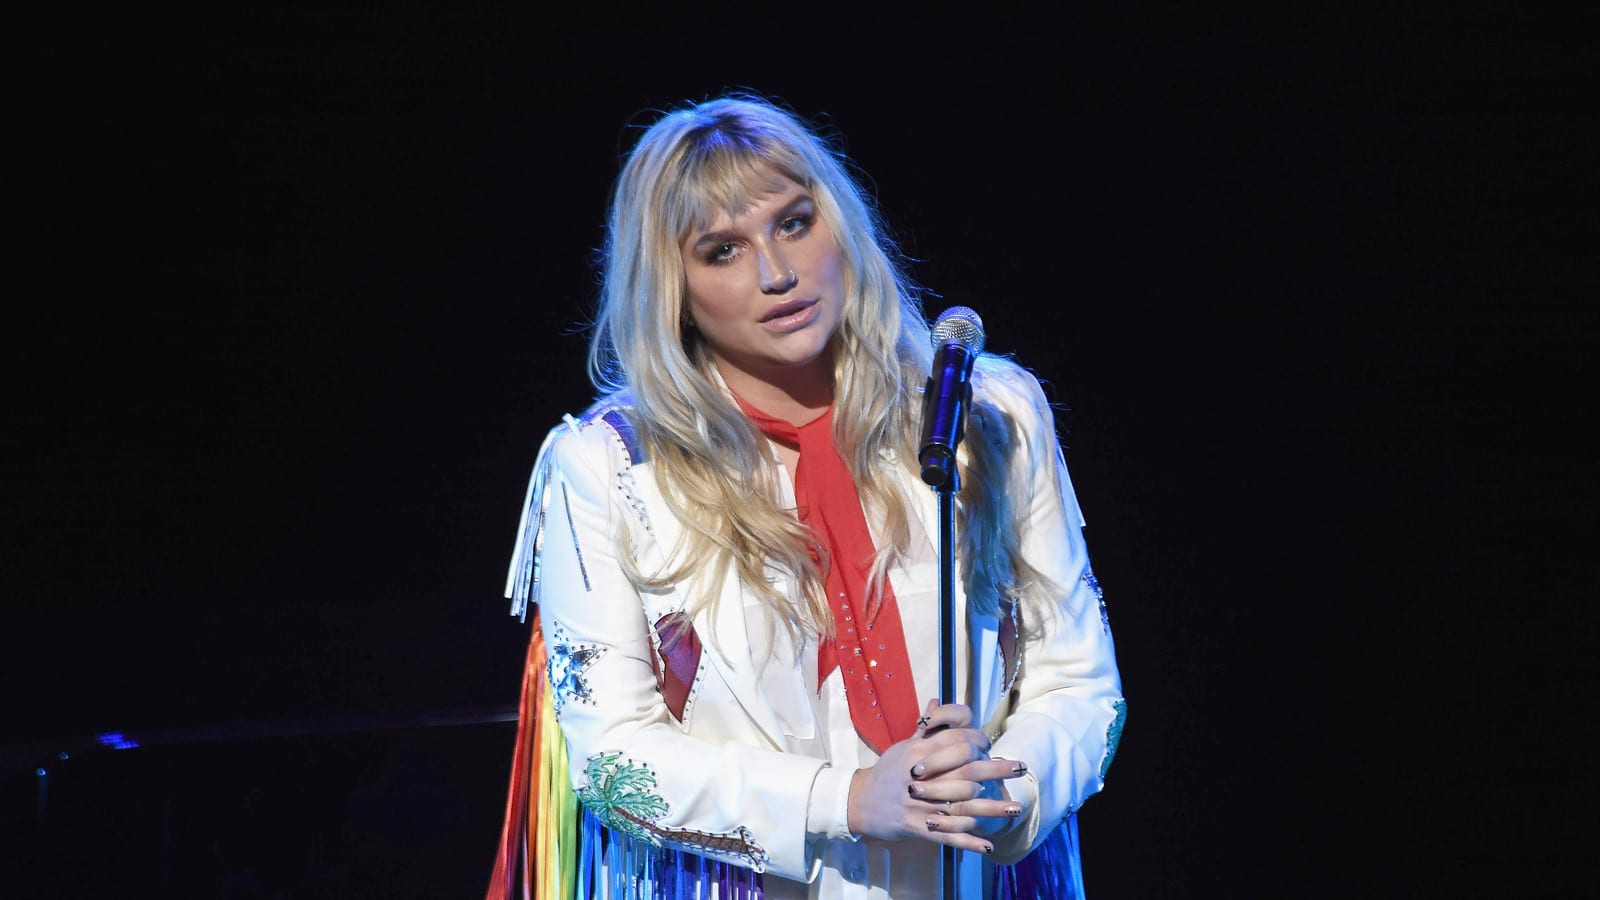 For her 30th birthday: 30 times Kesha has inspired us